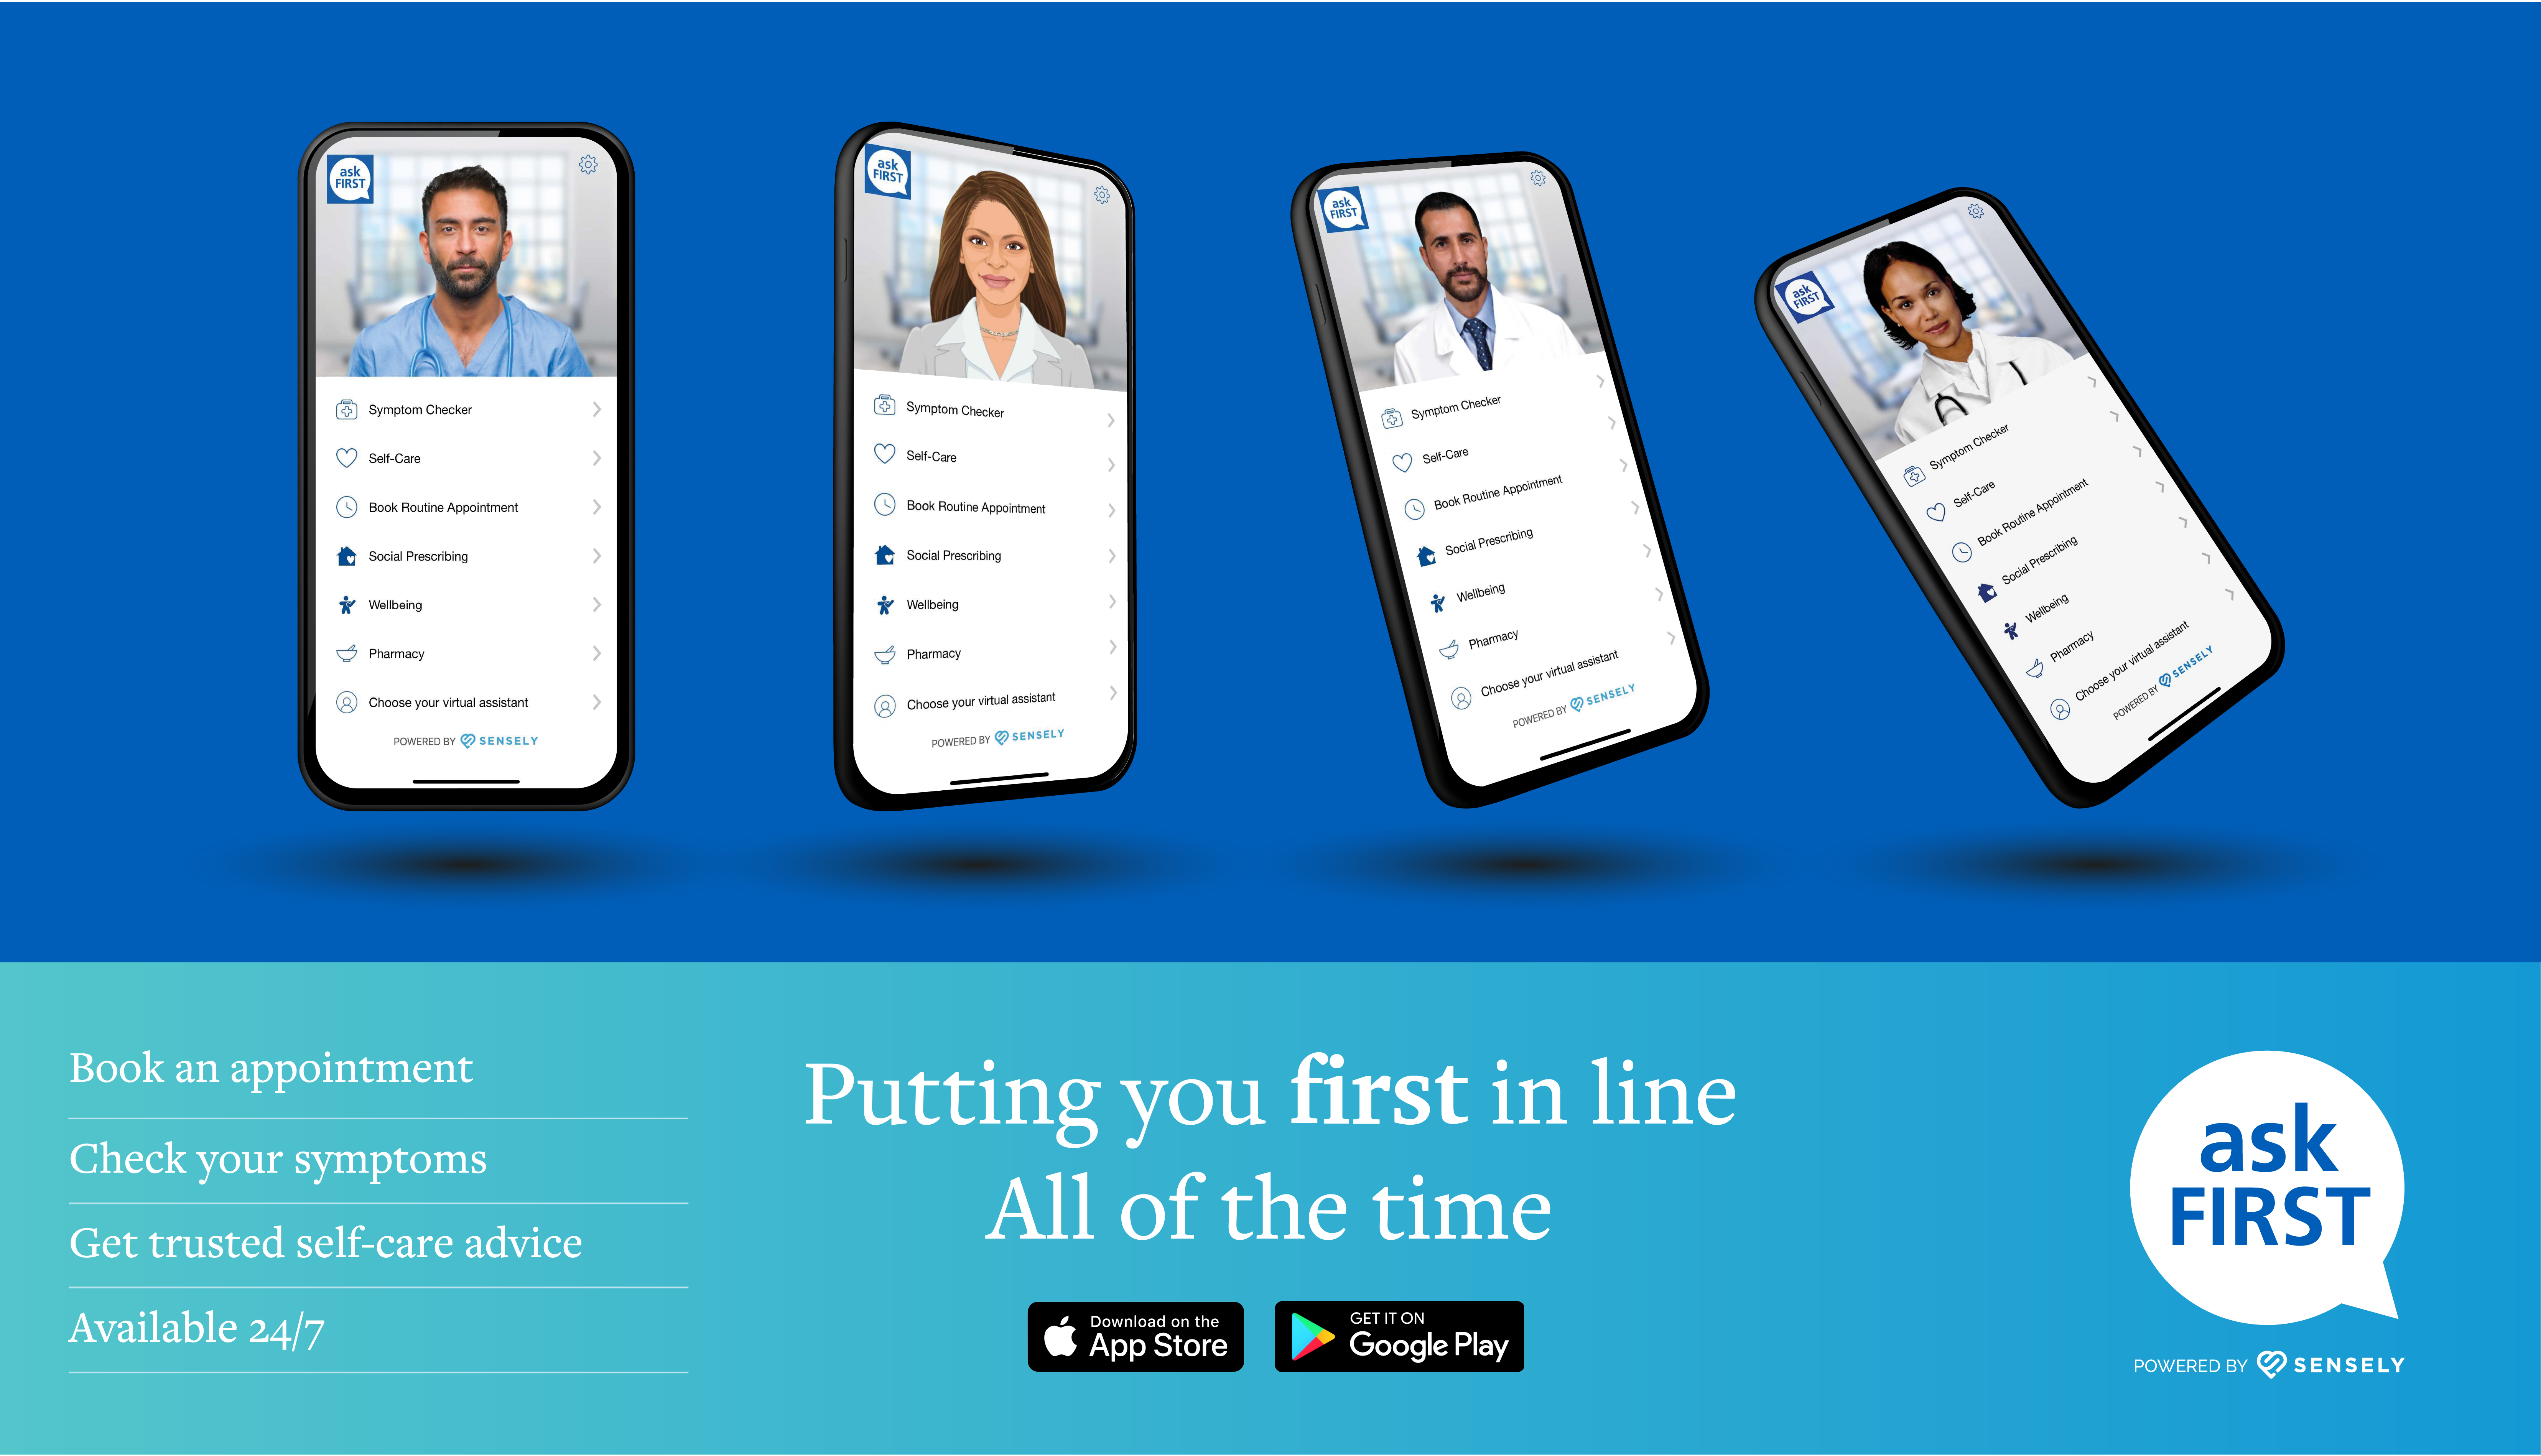 Ask First puts you first in line all of the time